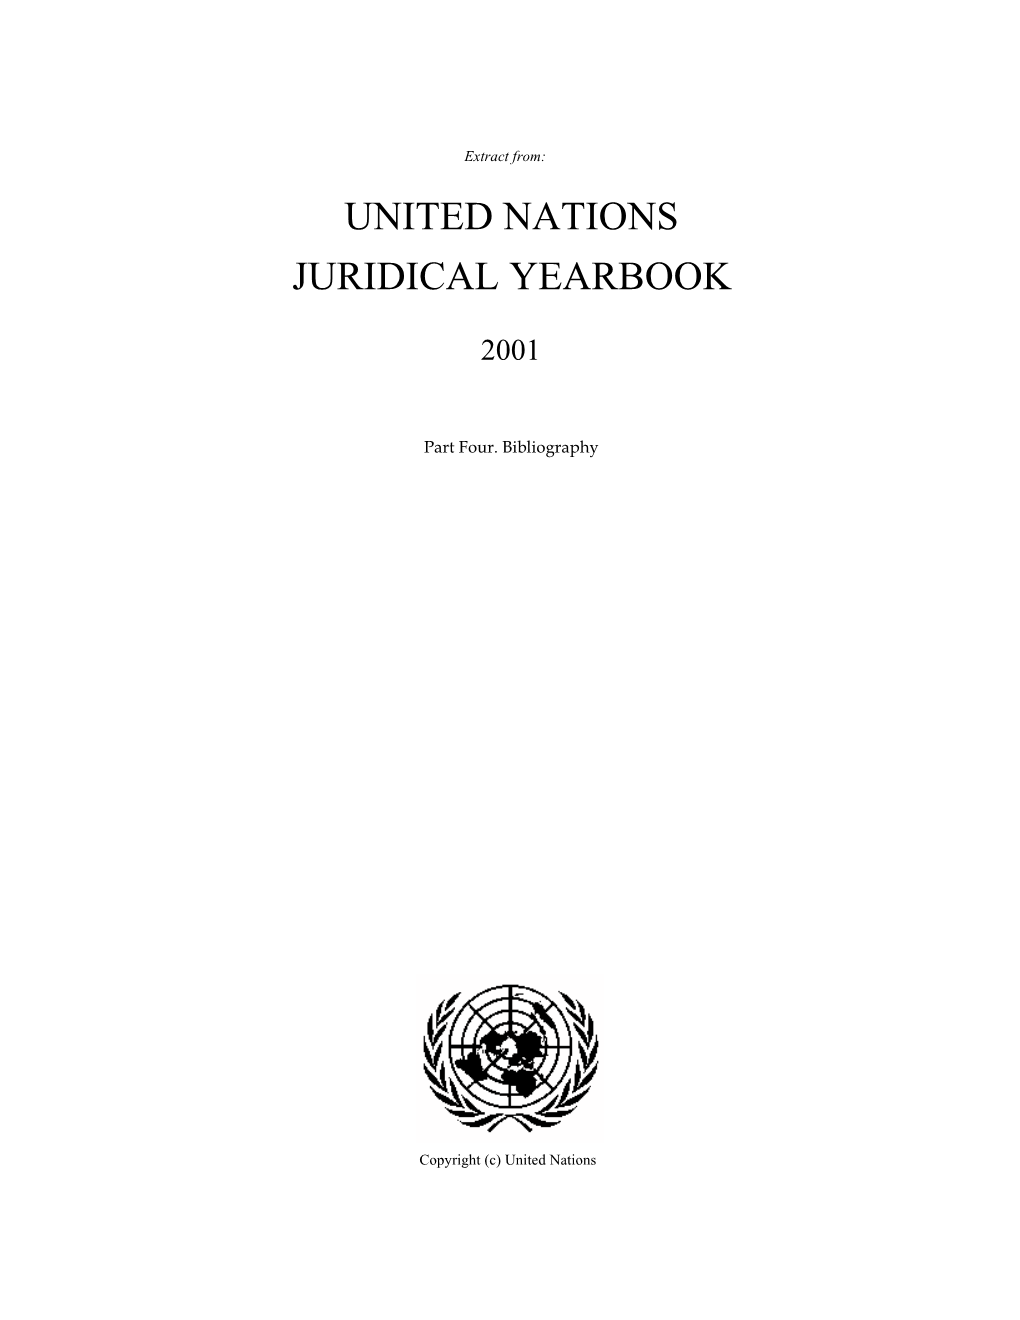 United Nations Juridical Yearbook, 2001